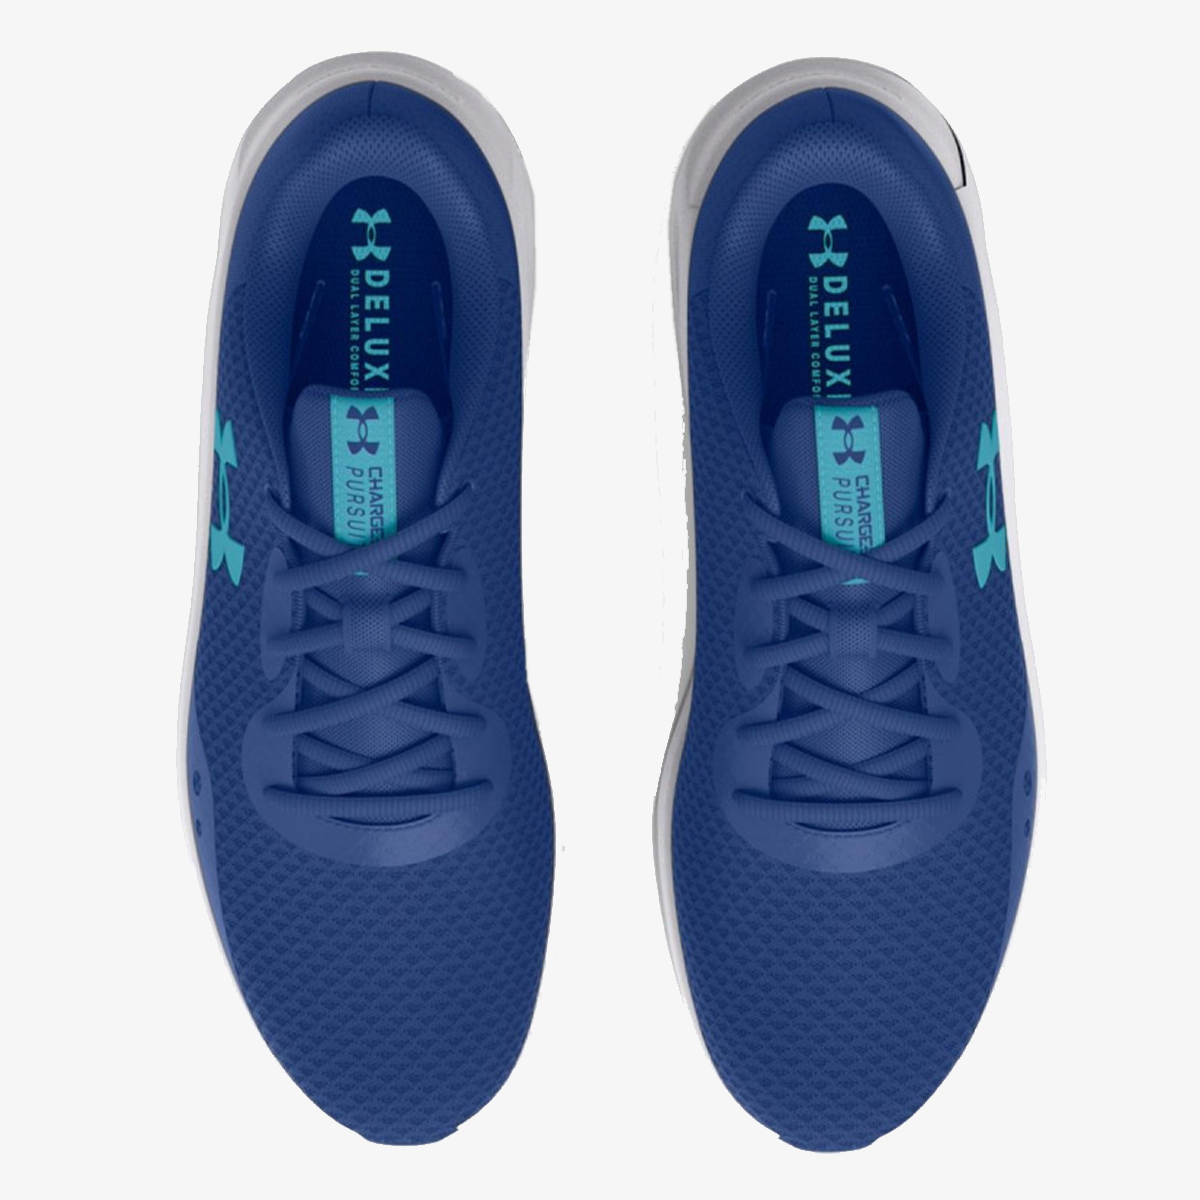 Under Armour Charged Pursuit 3 